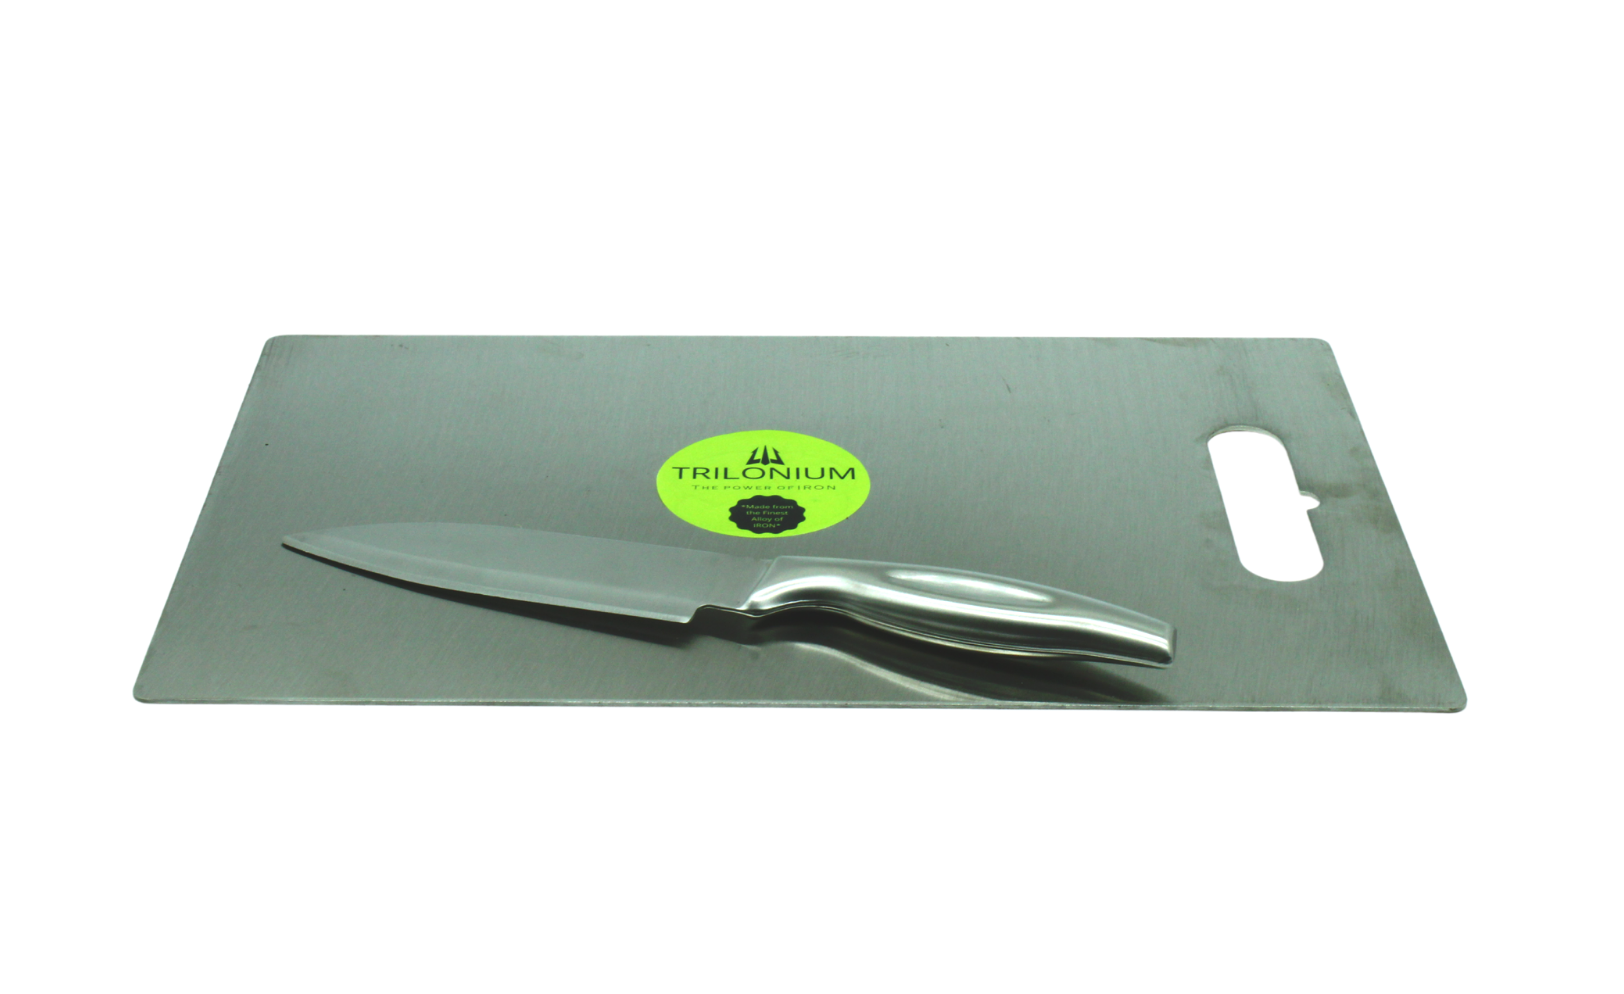 Stainless Steel Chopping | Cutting Board | Size No: 4 - 42cm X 29cm | Thickness: 2mm + 1 Pcs Knife | Combo TRILONIUM | Cast Iron Cookware